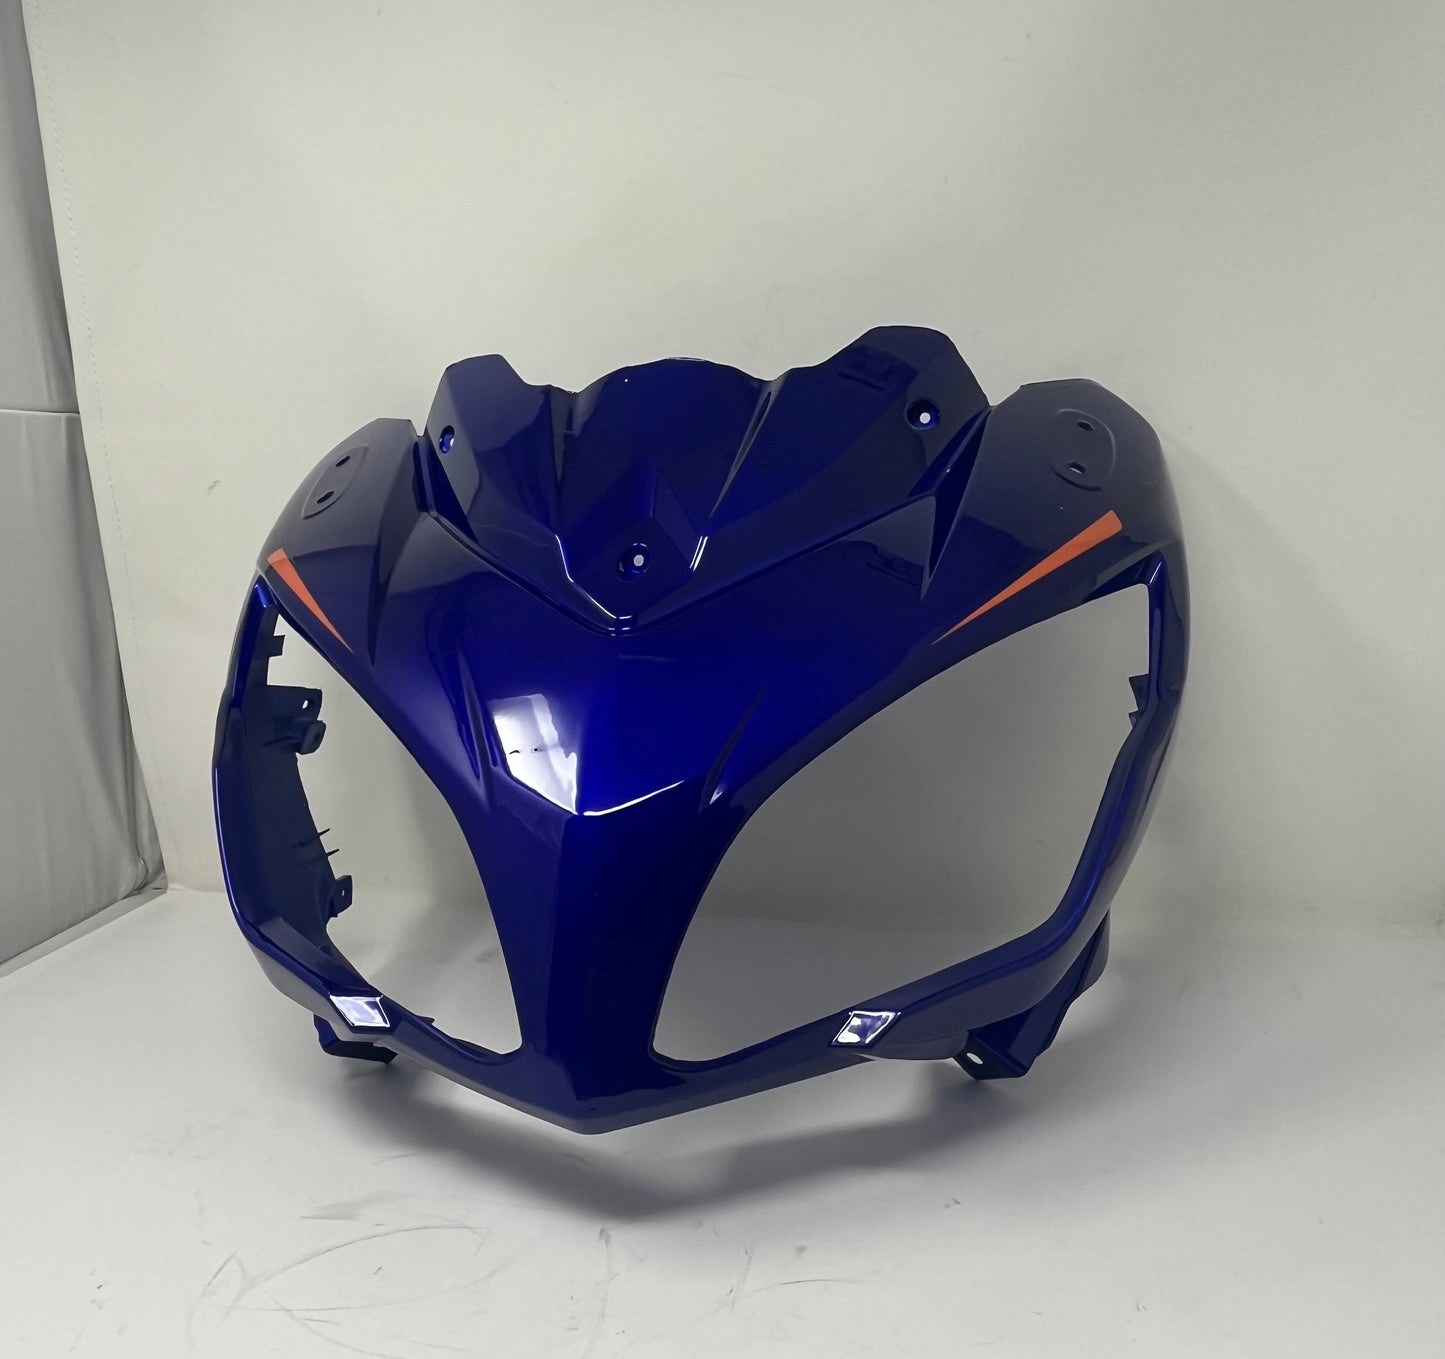 Dongfang DF250RTS headlight fairing for sale. 